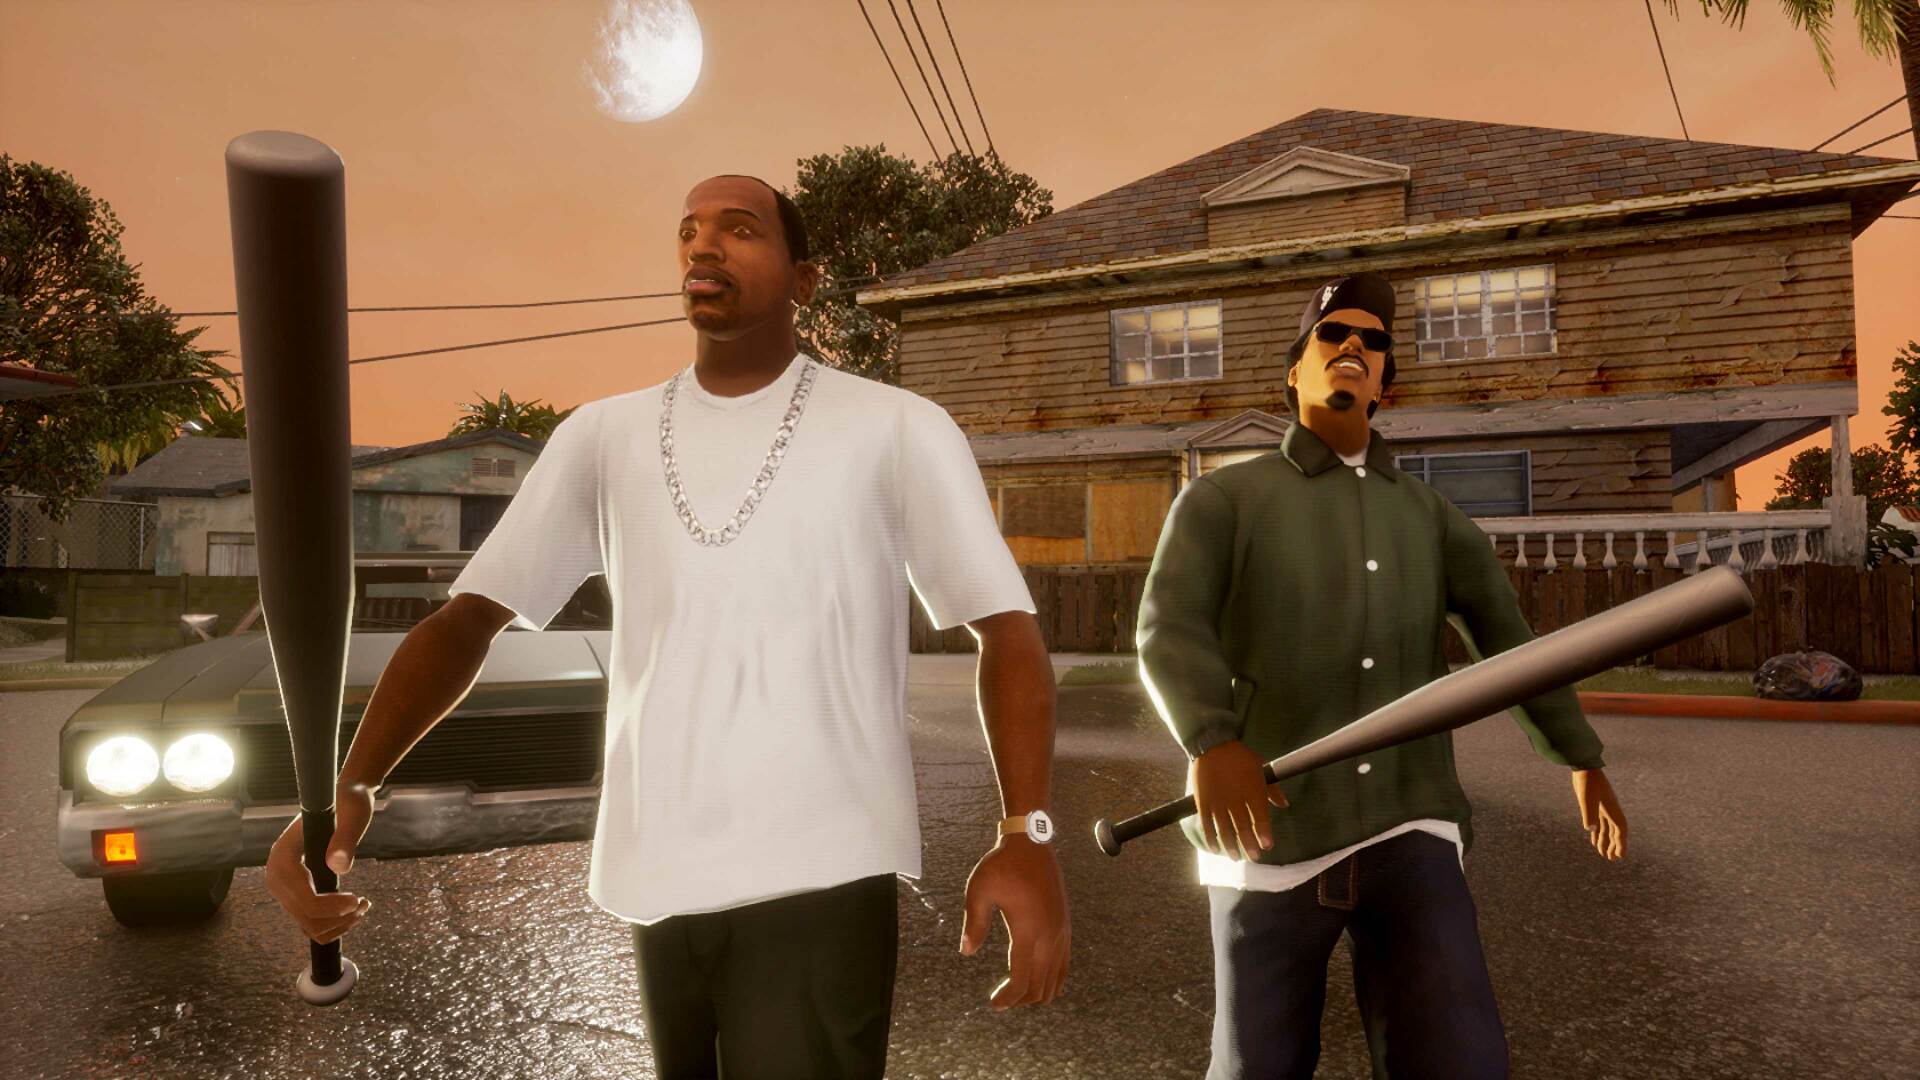 Rockstar might be releasing Grand Theft Auto San Andreas HD